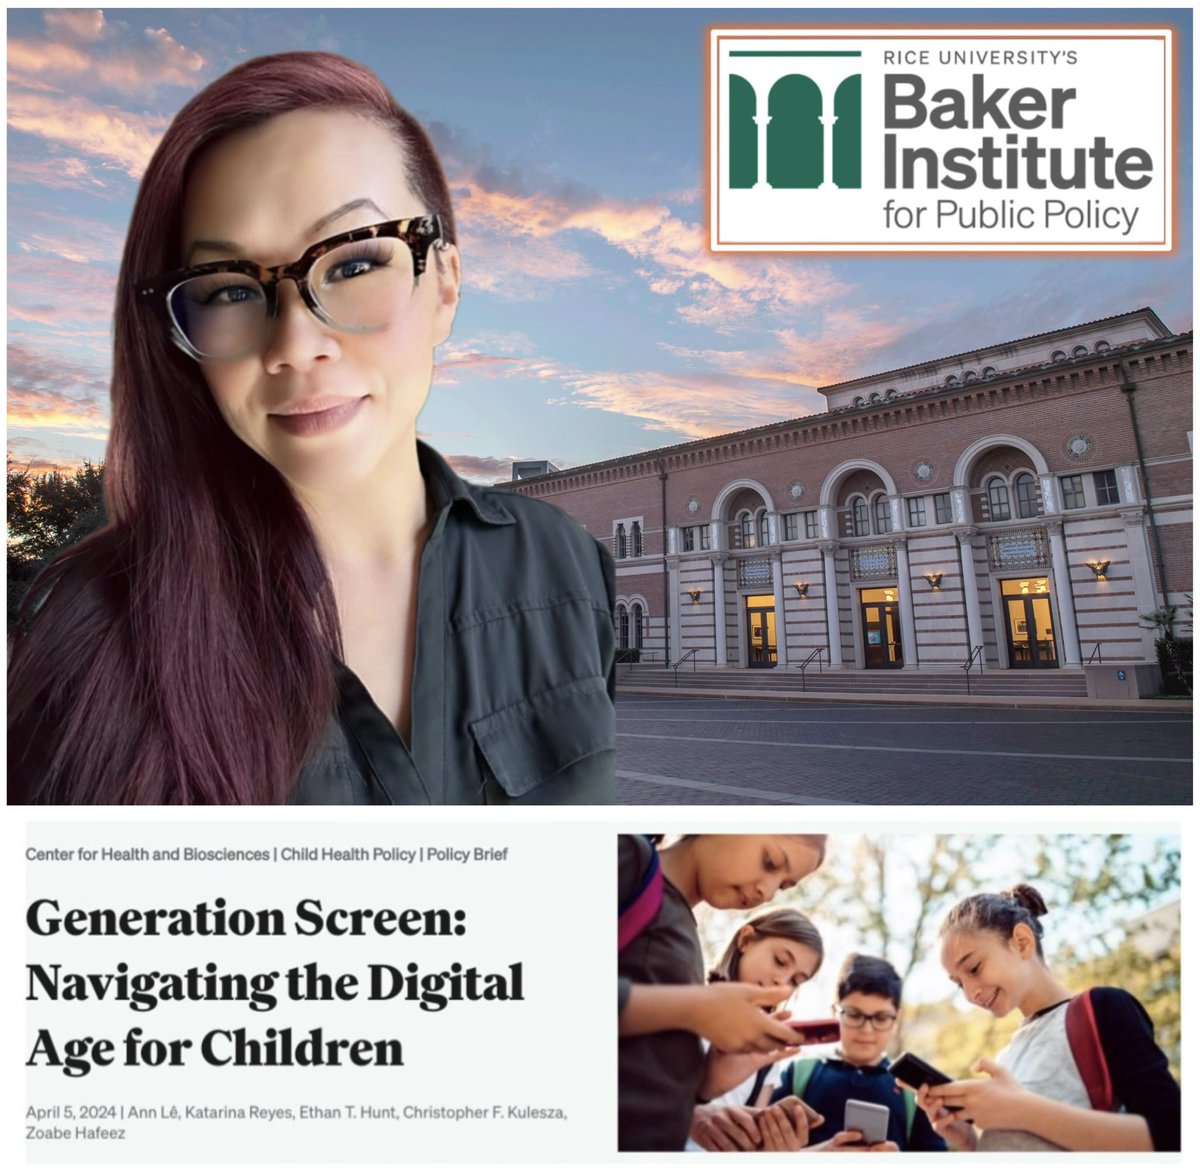 🚨COMING FRIDAY 🚨: A #Policy brief I have been collaborating with #RiceUniversity #BakerInstitute Center for #Health & #Biosciences is dropping #FRIDAY #FriYAY “Generation Screen: Navigating the #Digital Age for Children” Link Available SOON! #published #author #researcher #tech